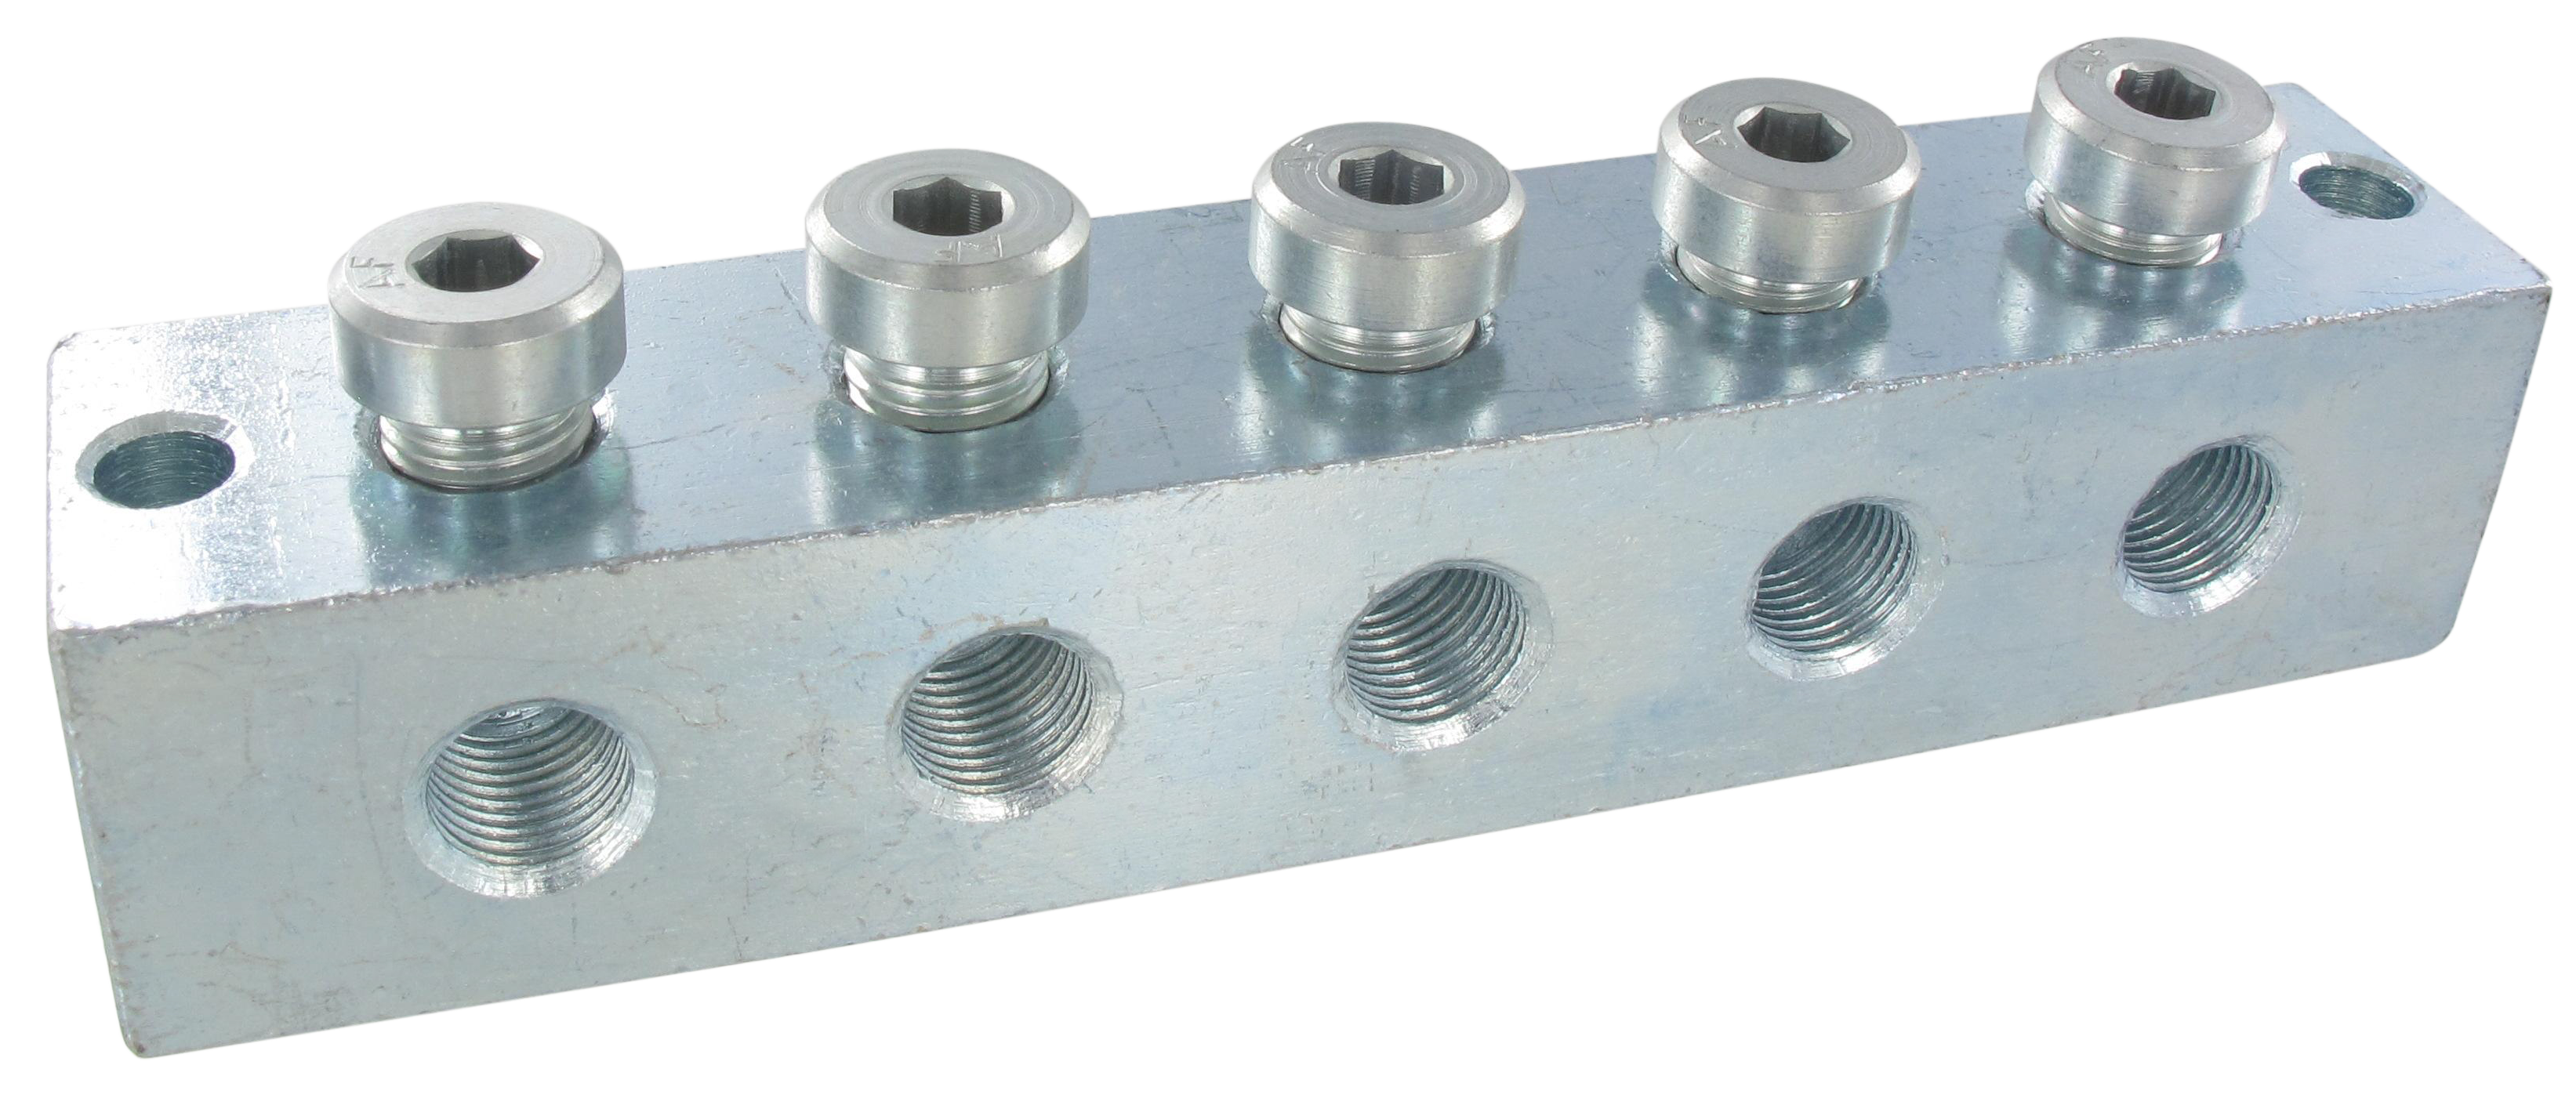 Threaded T-connector manifold M10x1 in galvanised steel M10X1 with 2 connections Standard fittings for lubrication